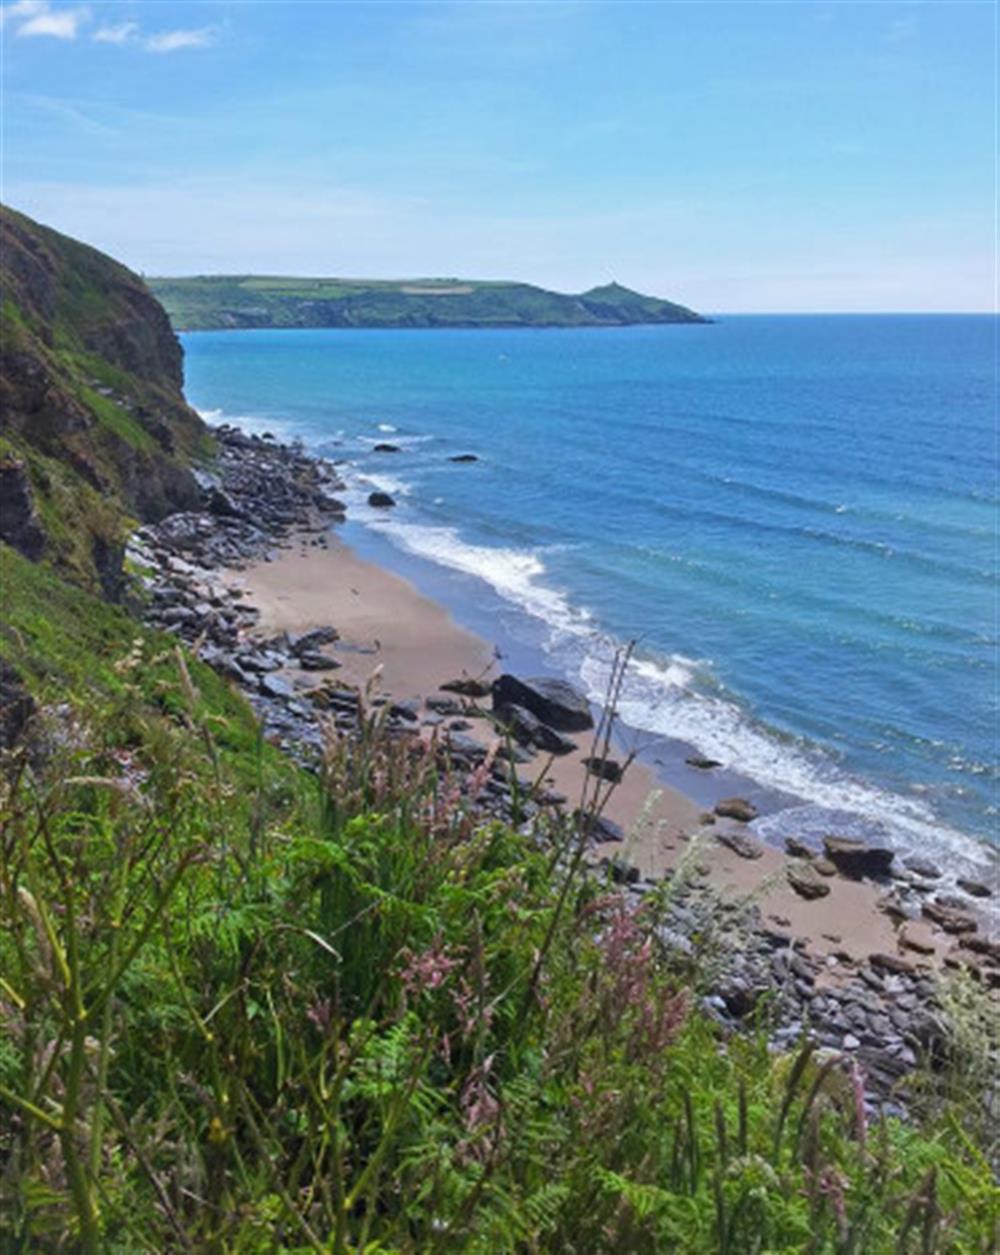 Whitsand Bay along the South coast of Cornwall at East Cliff in Polperro